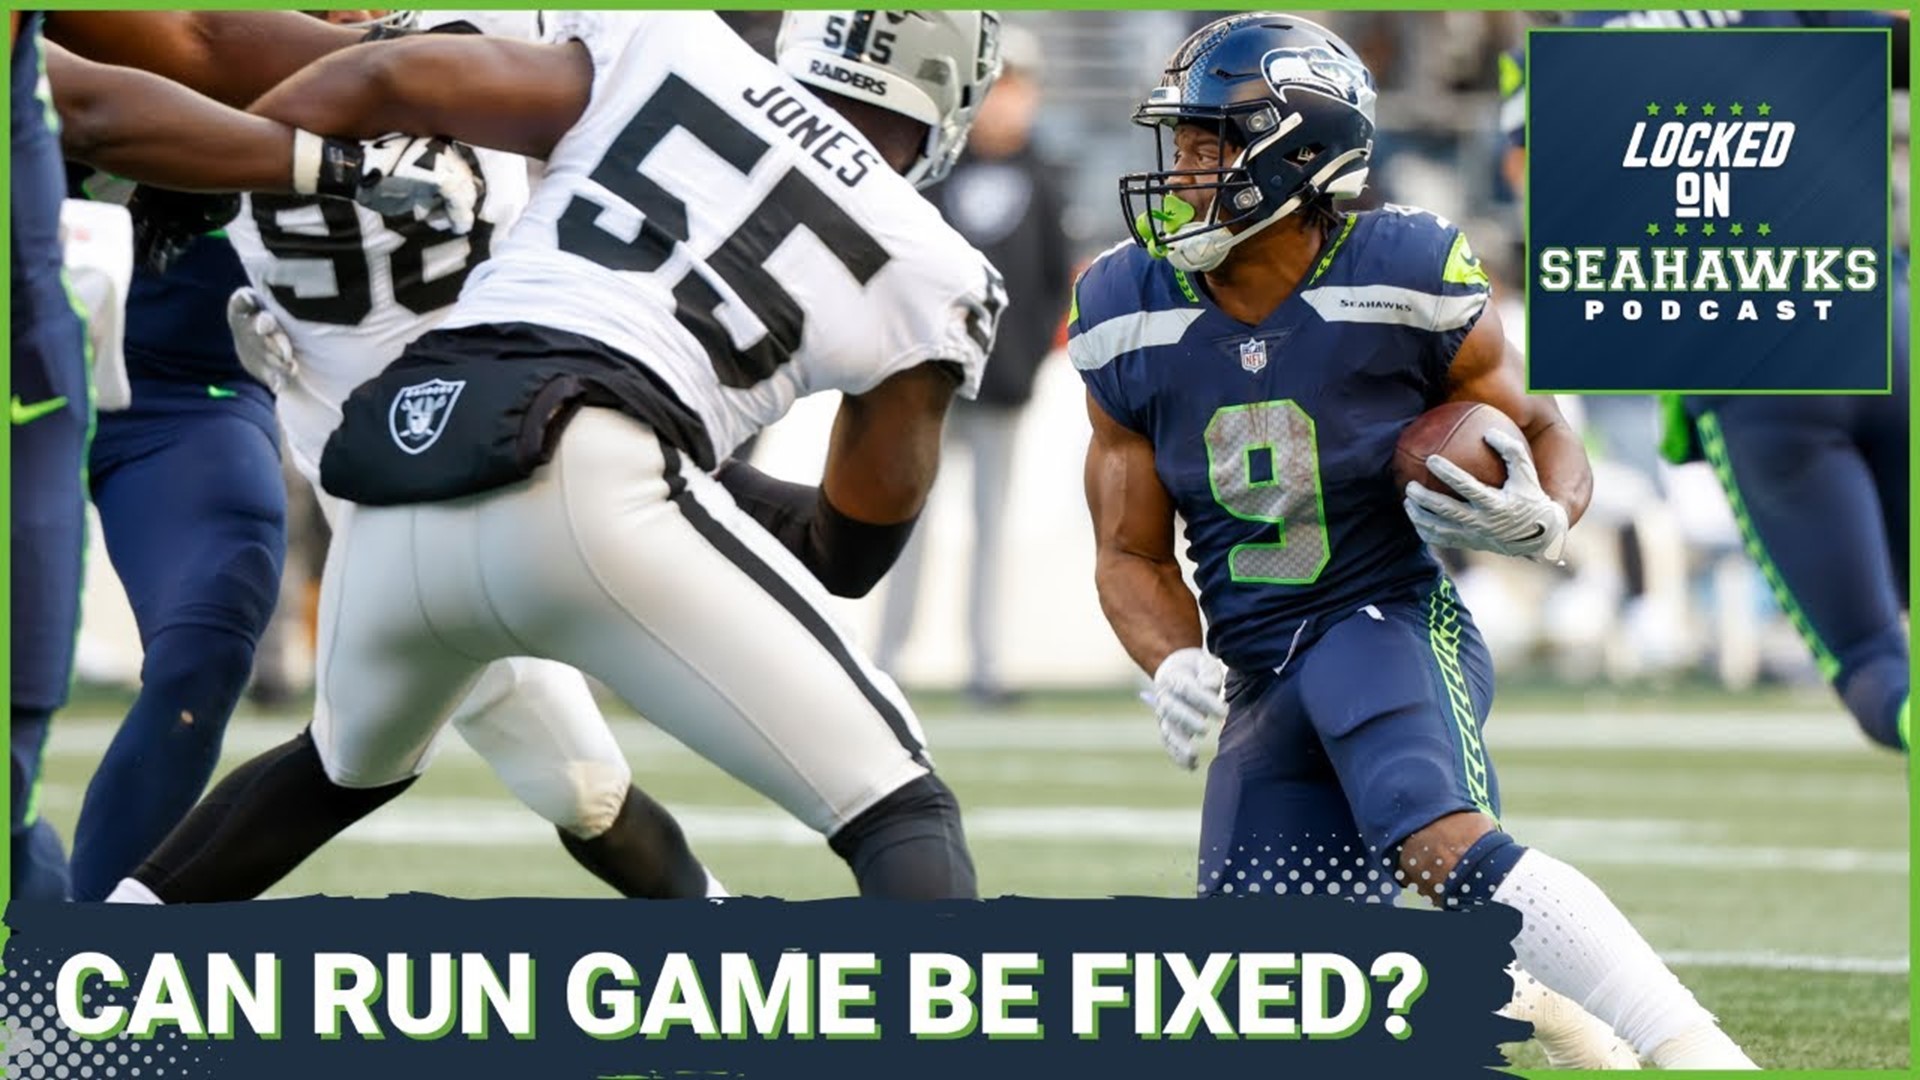 Hosts Corbin Smith and Rob Rang discuss whether or not Seattle's run game can be fixed in quick order and dish their weekly hot takes in "Tell the Truth Tuesday."